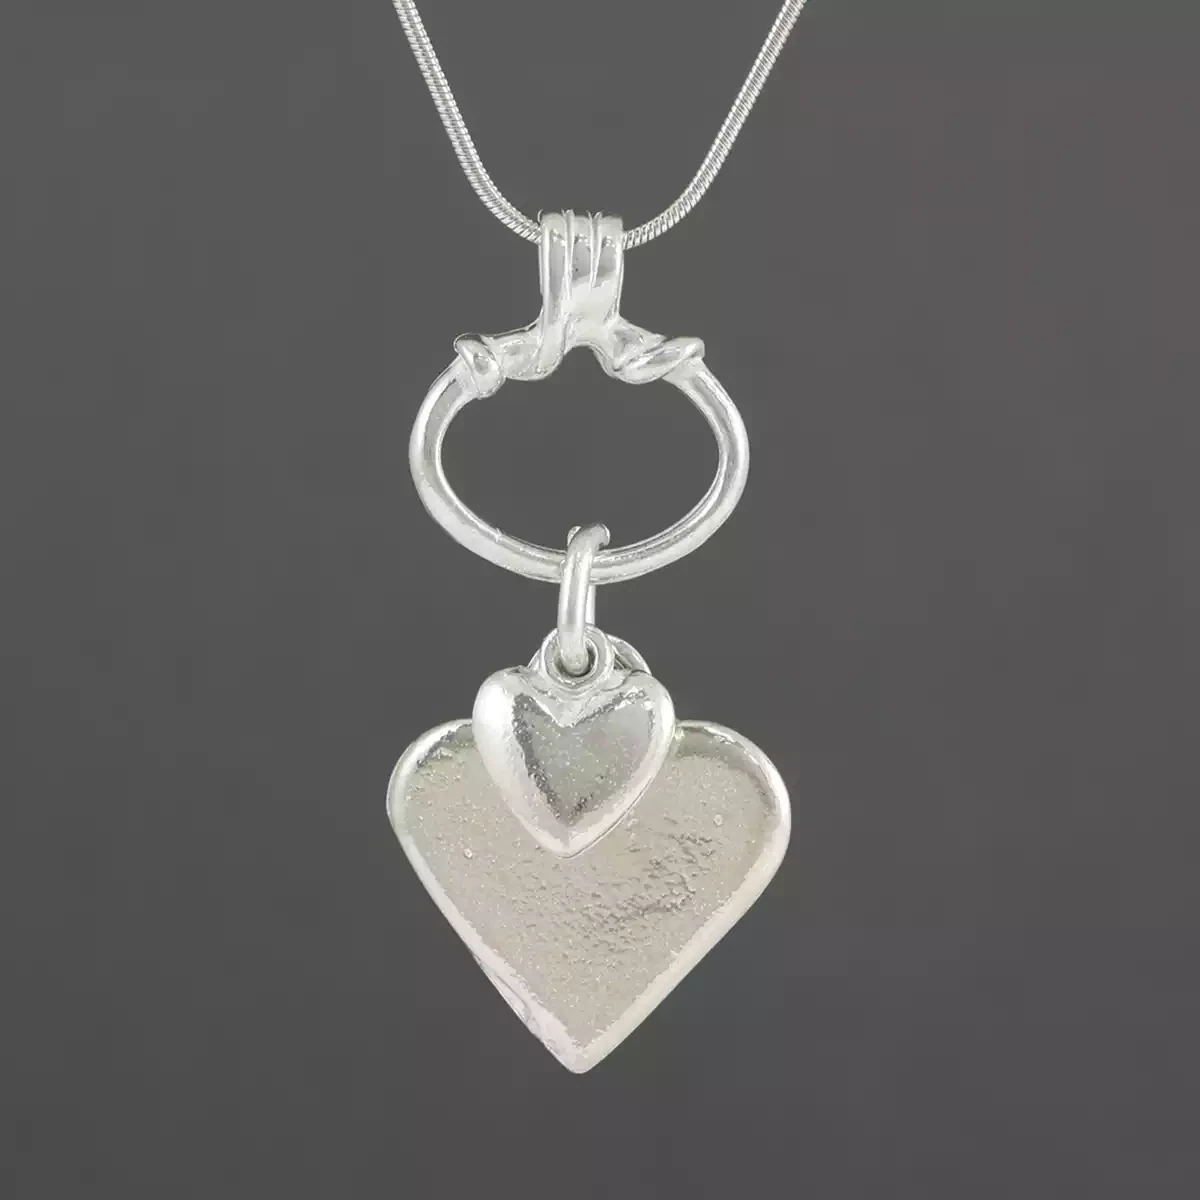 Pewter Charm Necklace - Double Heart and Twisted Ring by Metal Planet